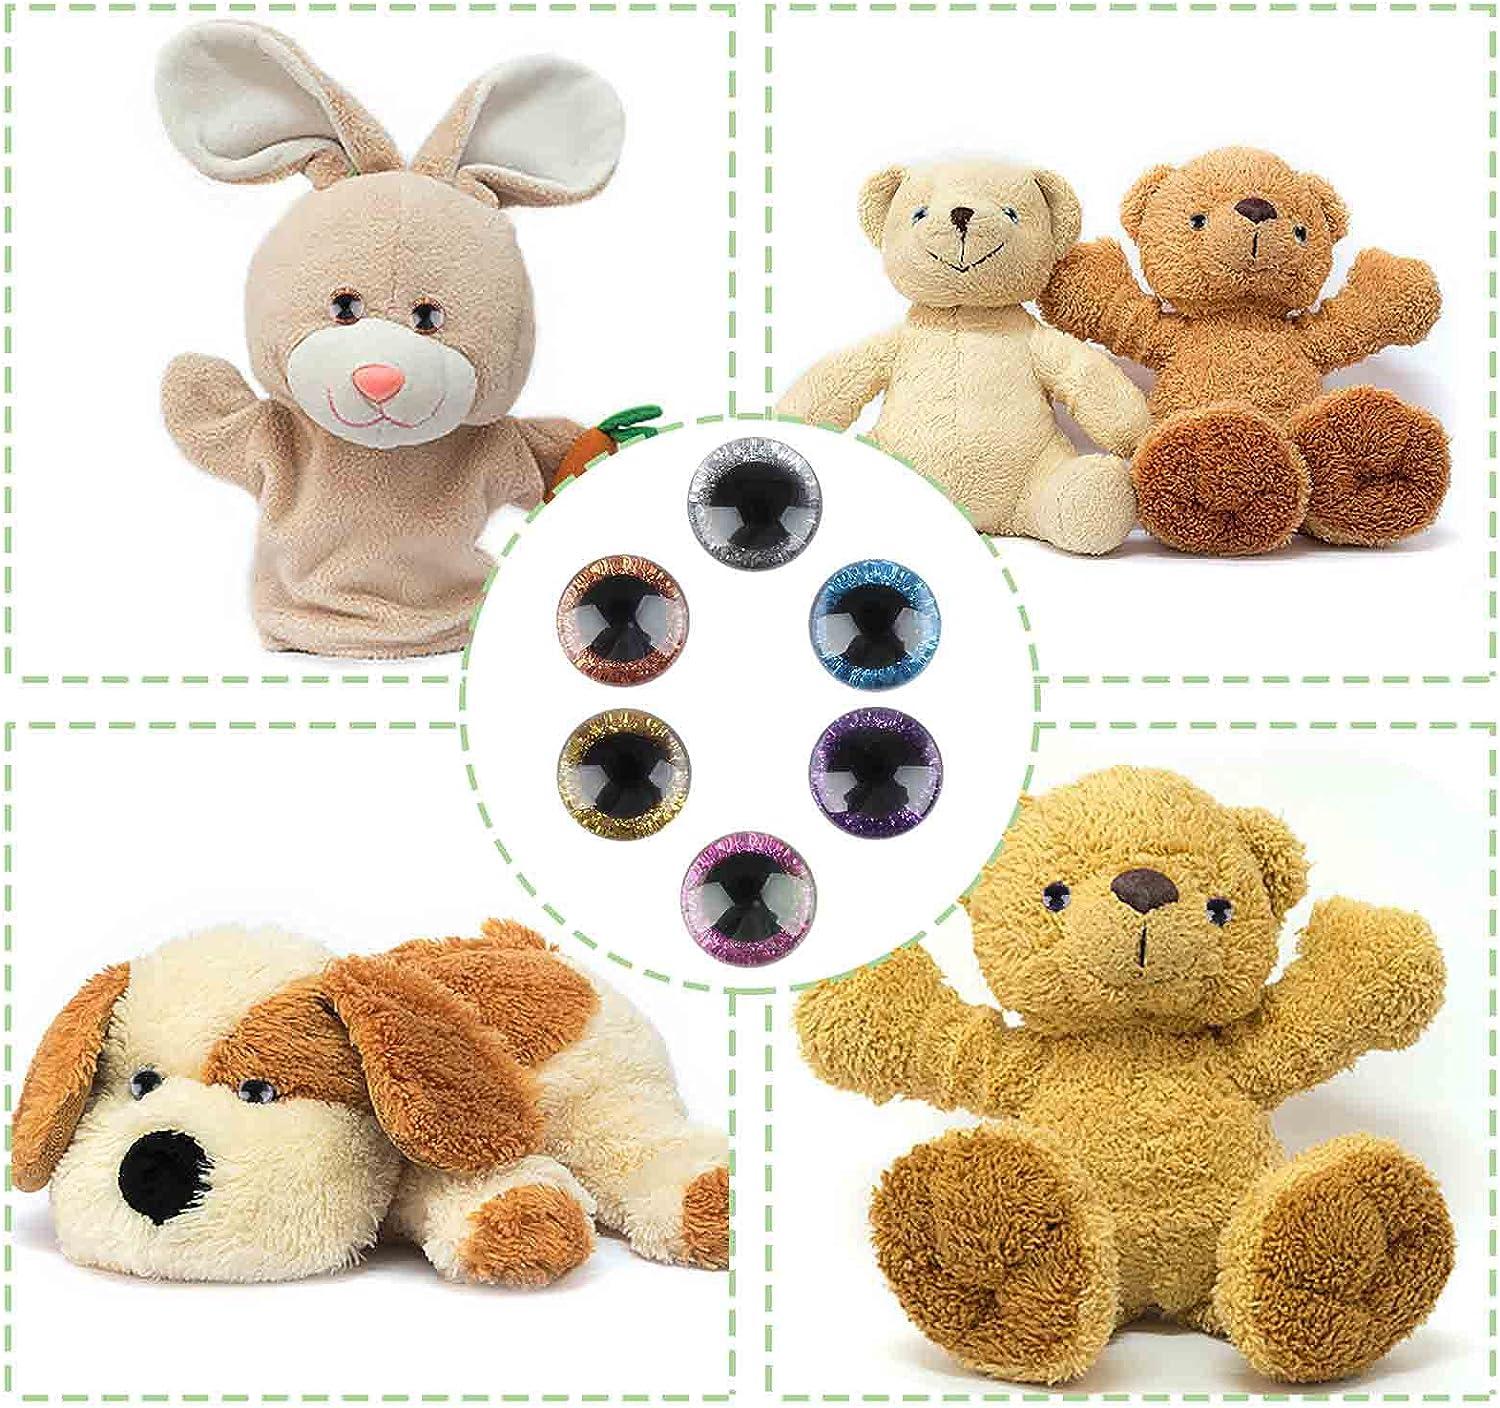 18mm Plastic Brown Animal Safety Eyes for Stuffed Animals 2 Pieces